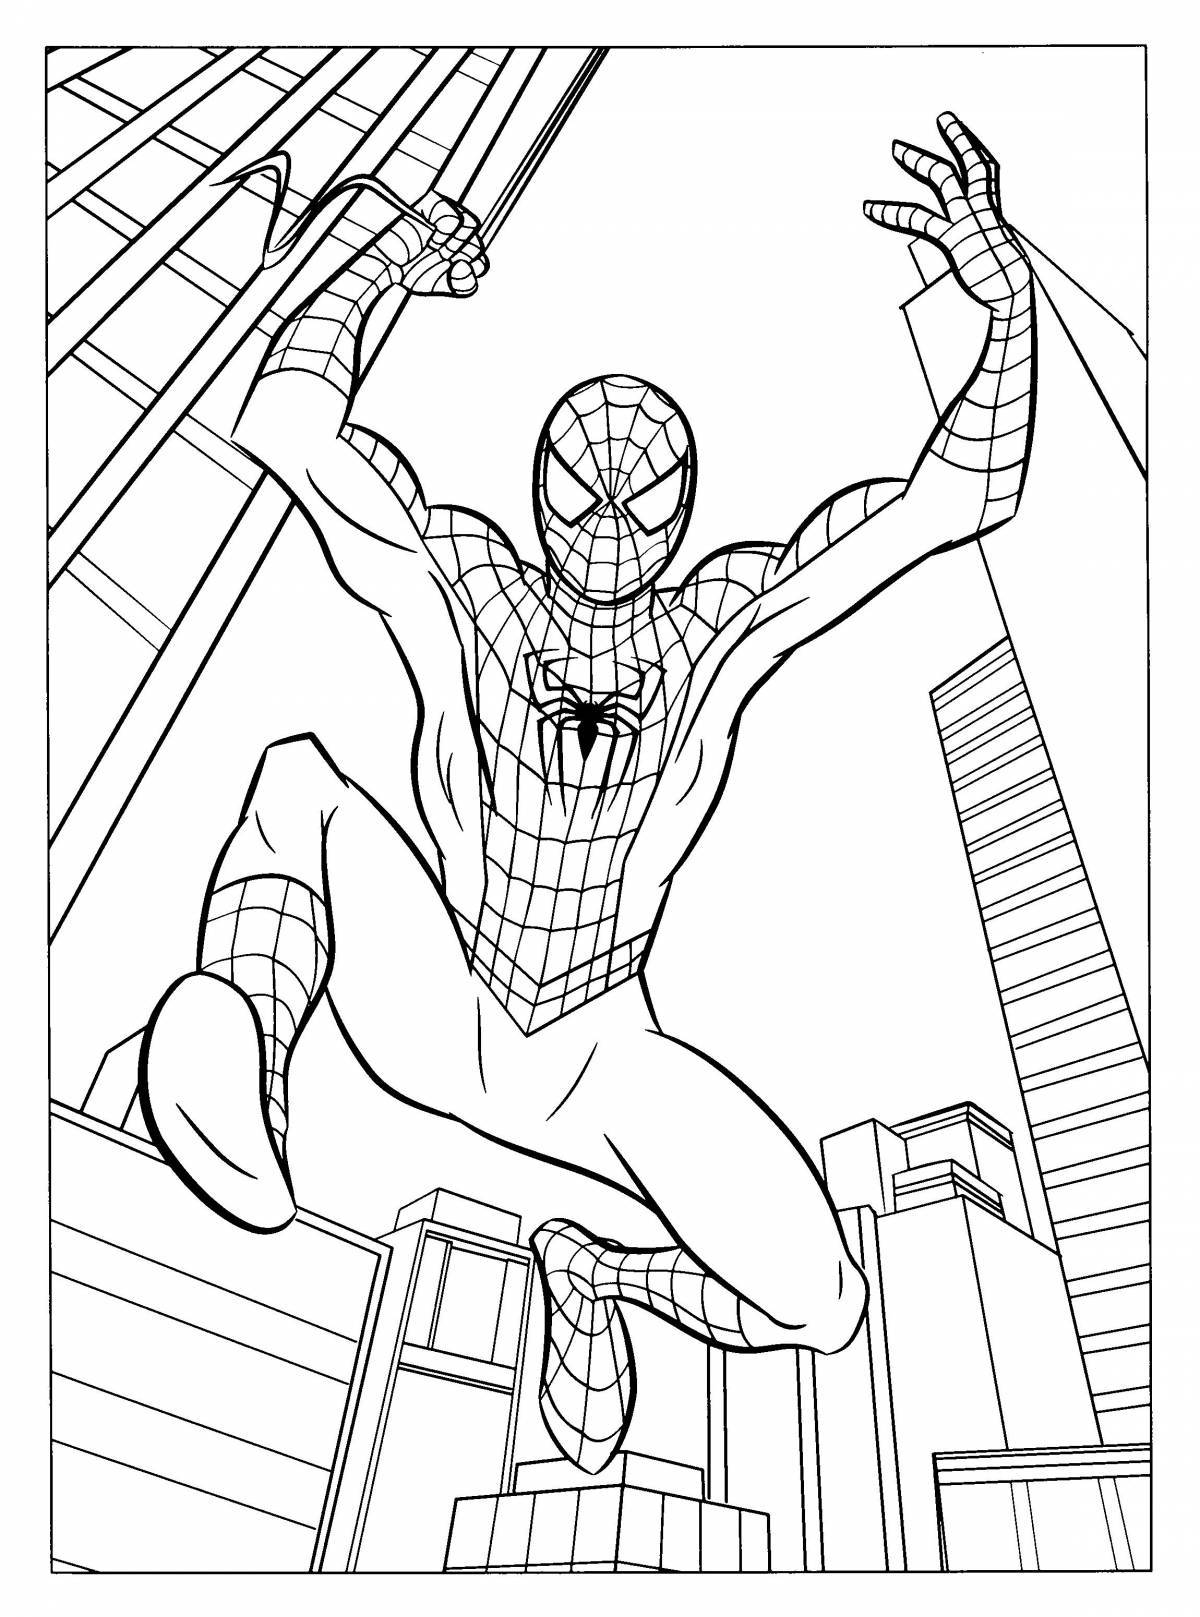 Funny Spiderman coloring pages for boys